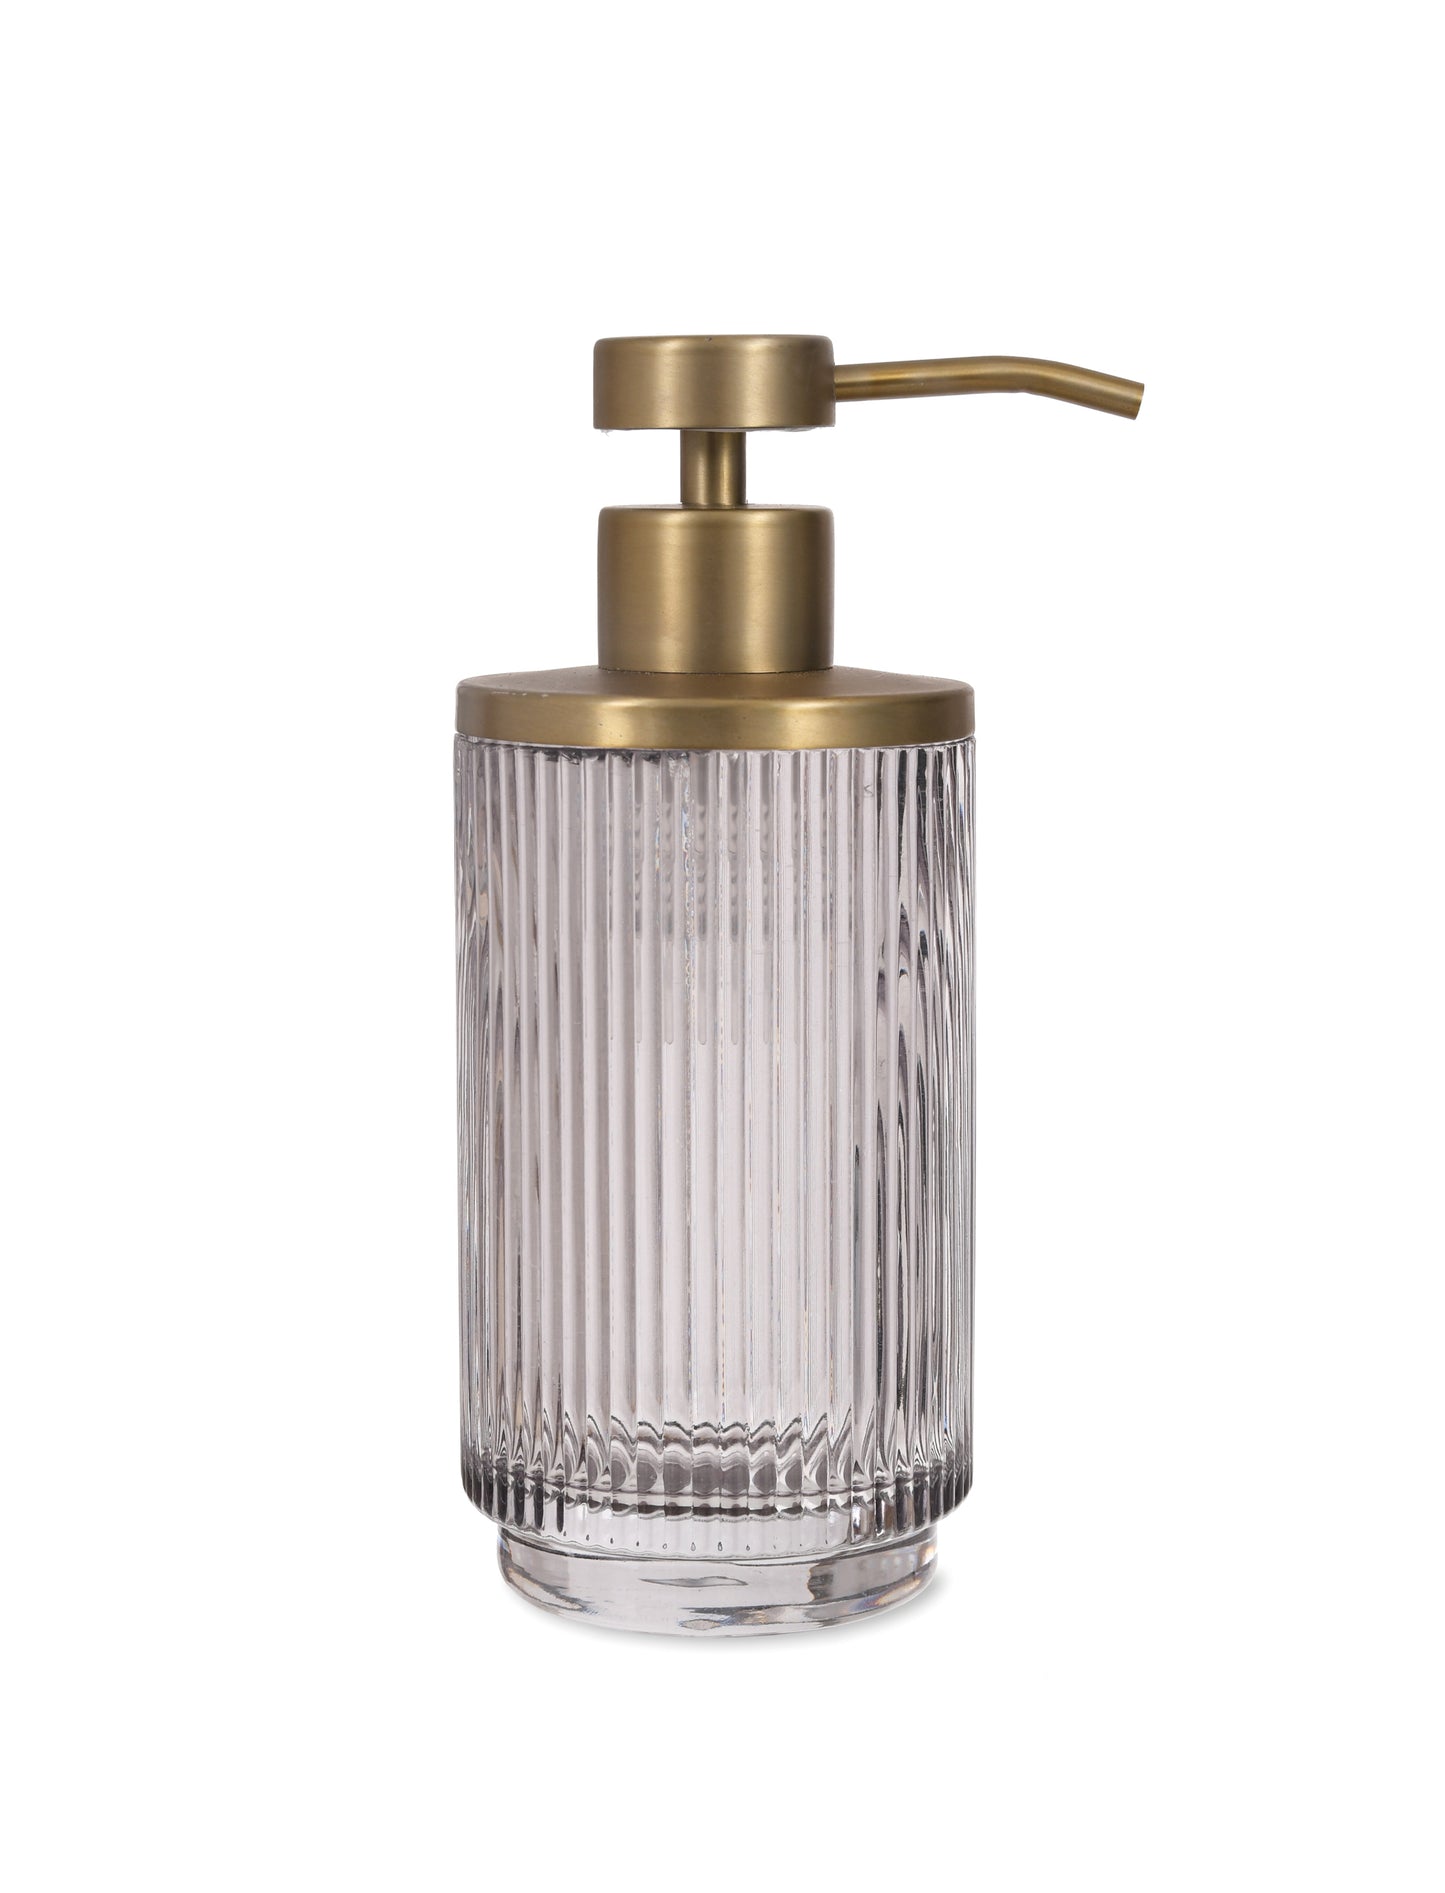 The Every Space Adelphi Soap Dispenser with smoked glass body and brass details by Garden Trading Co.